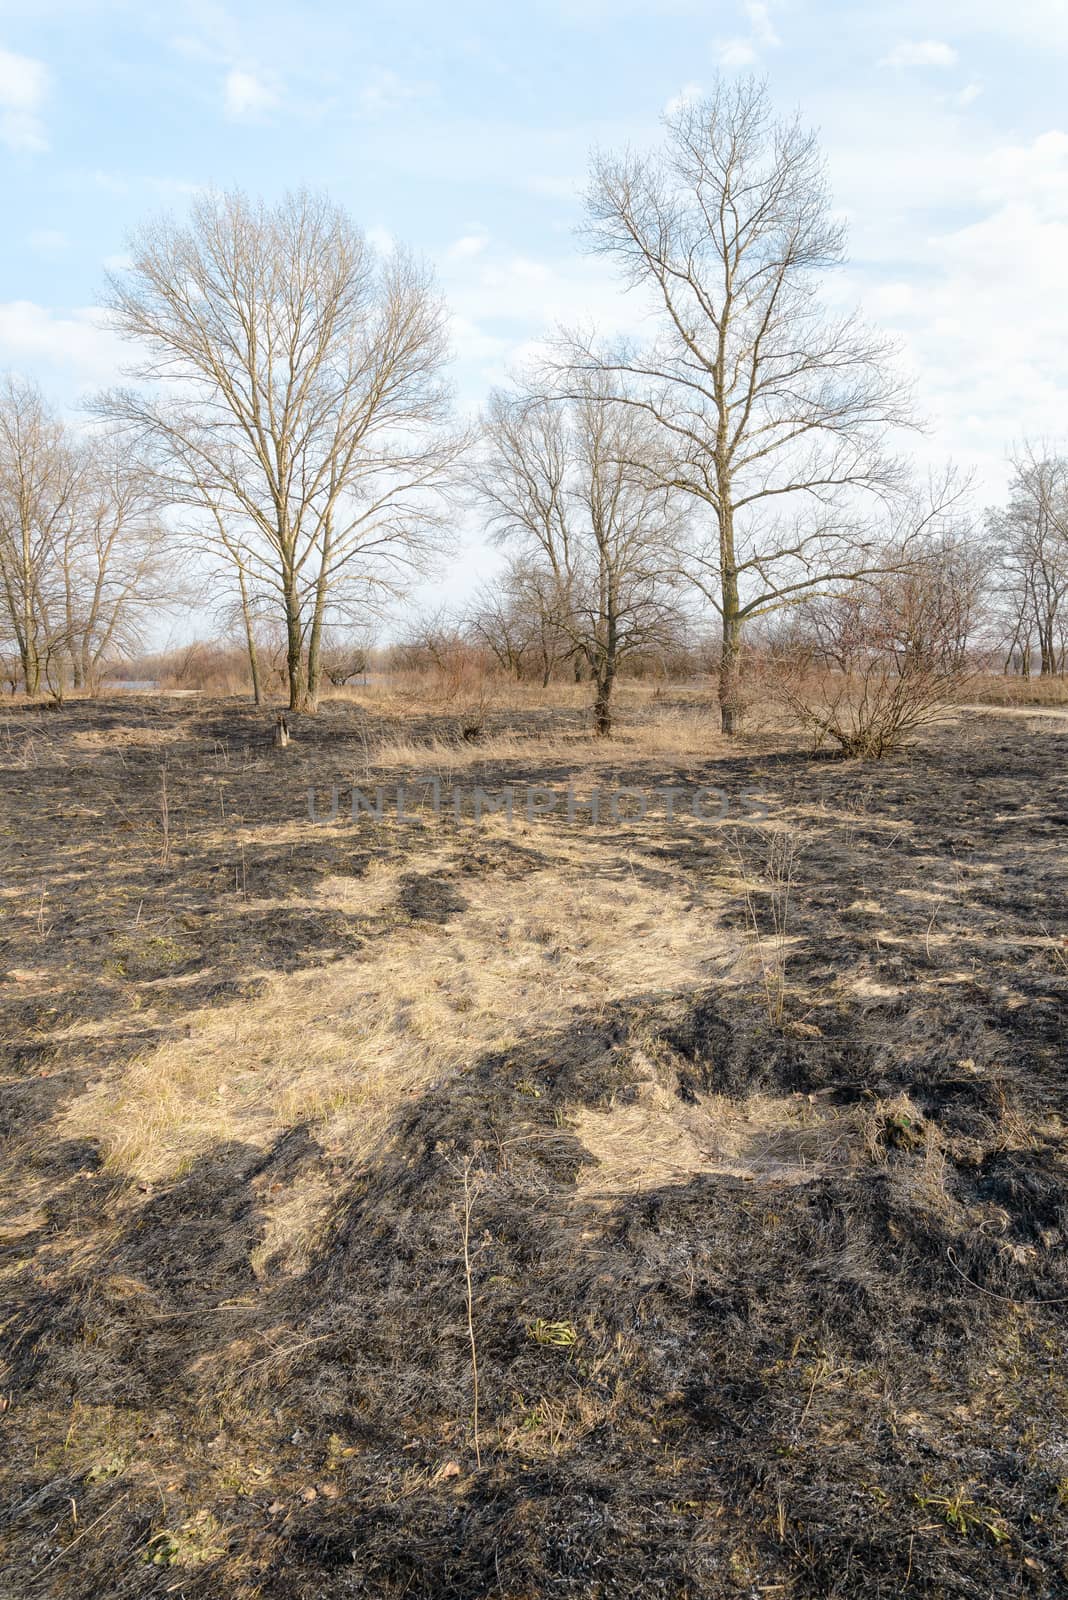 Wasteland after fire consequences: dry ground, tree roots and bushes are burnt and devastated